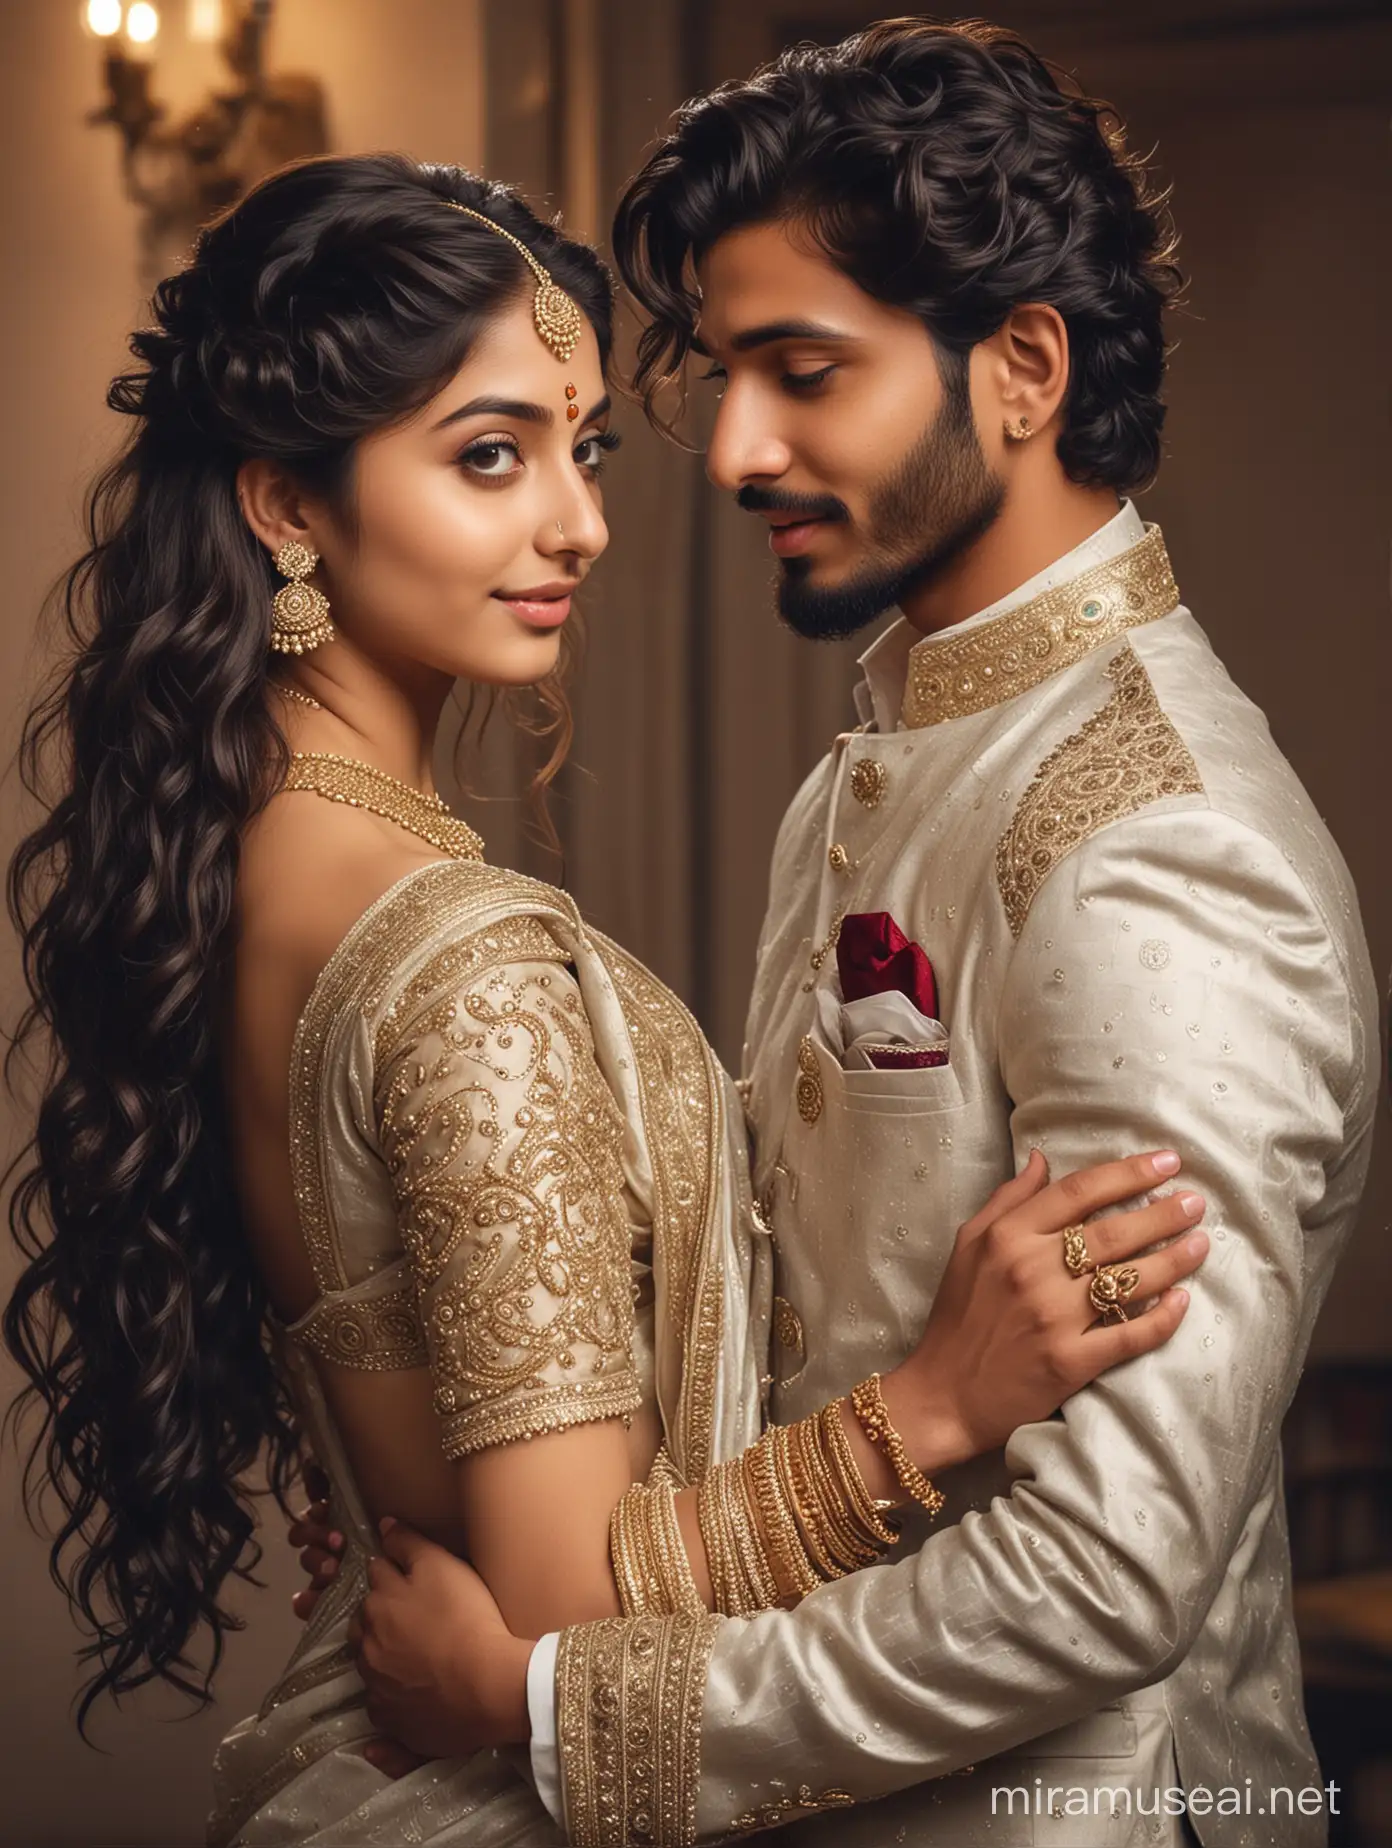 Intimate Indian Couple Embracing in Formal Attire with Elegant Saree and Trim Beard